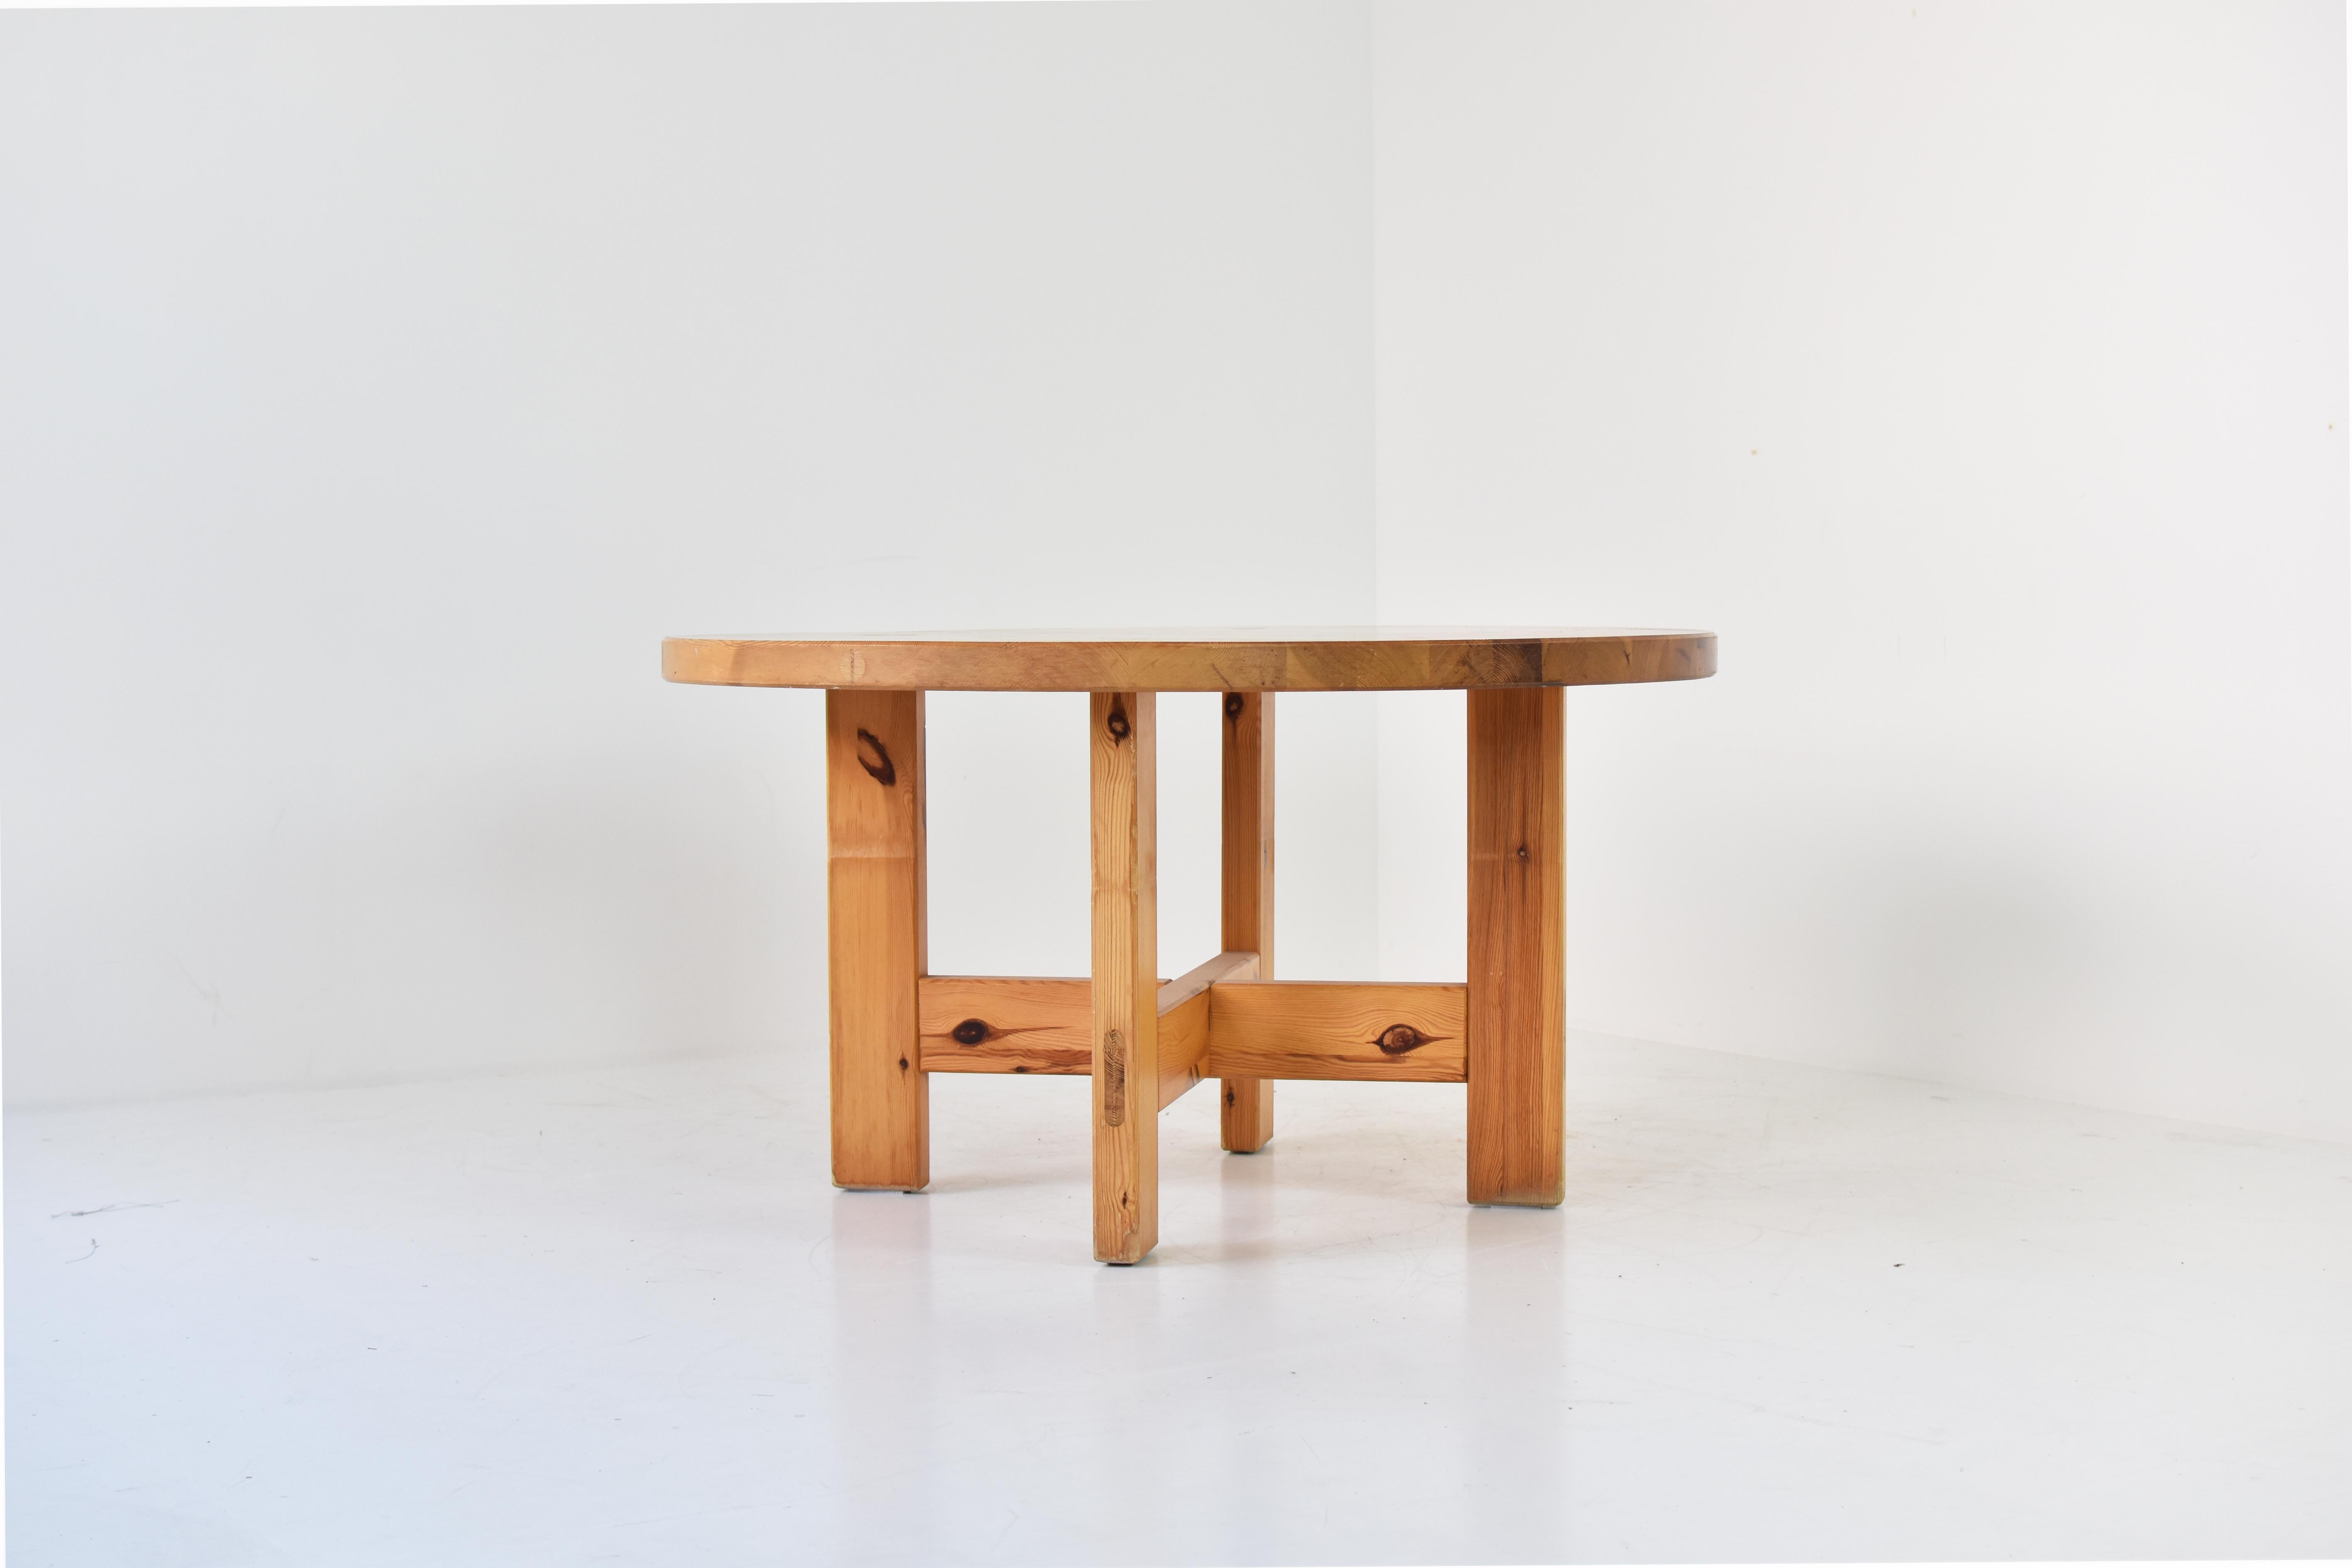 Round dining table by Roland Wilhelmsson for Karl Andersson and Soner in Huskvarna, Sweden 1970s. This table is made out of solid pinewood and has a cross between the legs. Nice detailed visible joints on the top and sides. Presented in a good